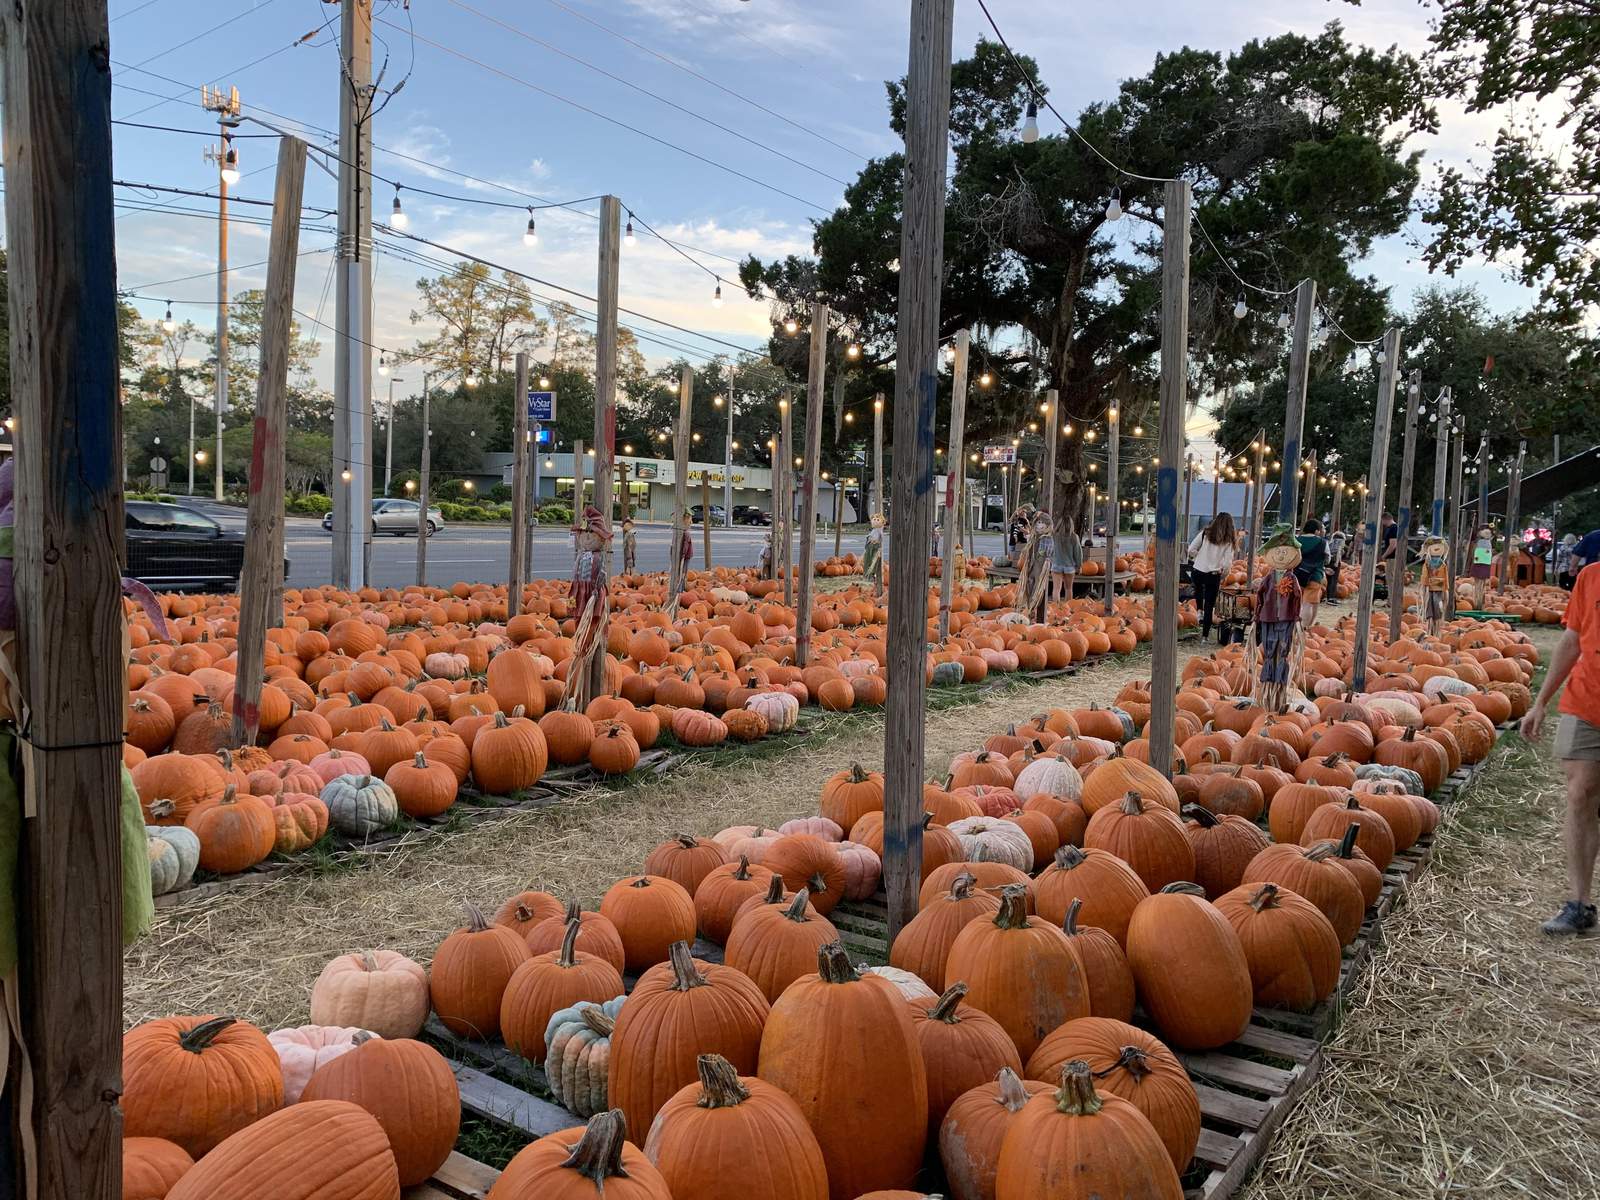 County by county: Here are the pumpkin patches open in 2020